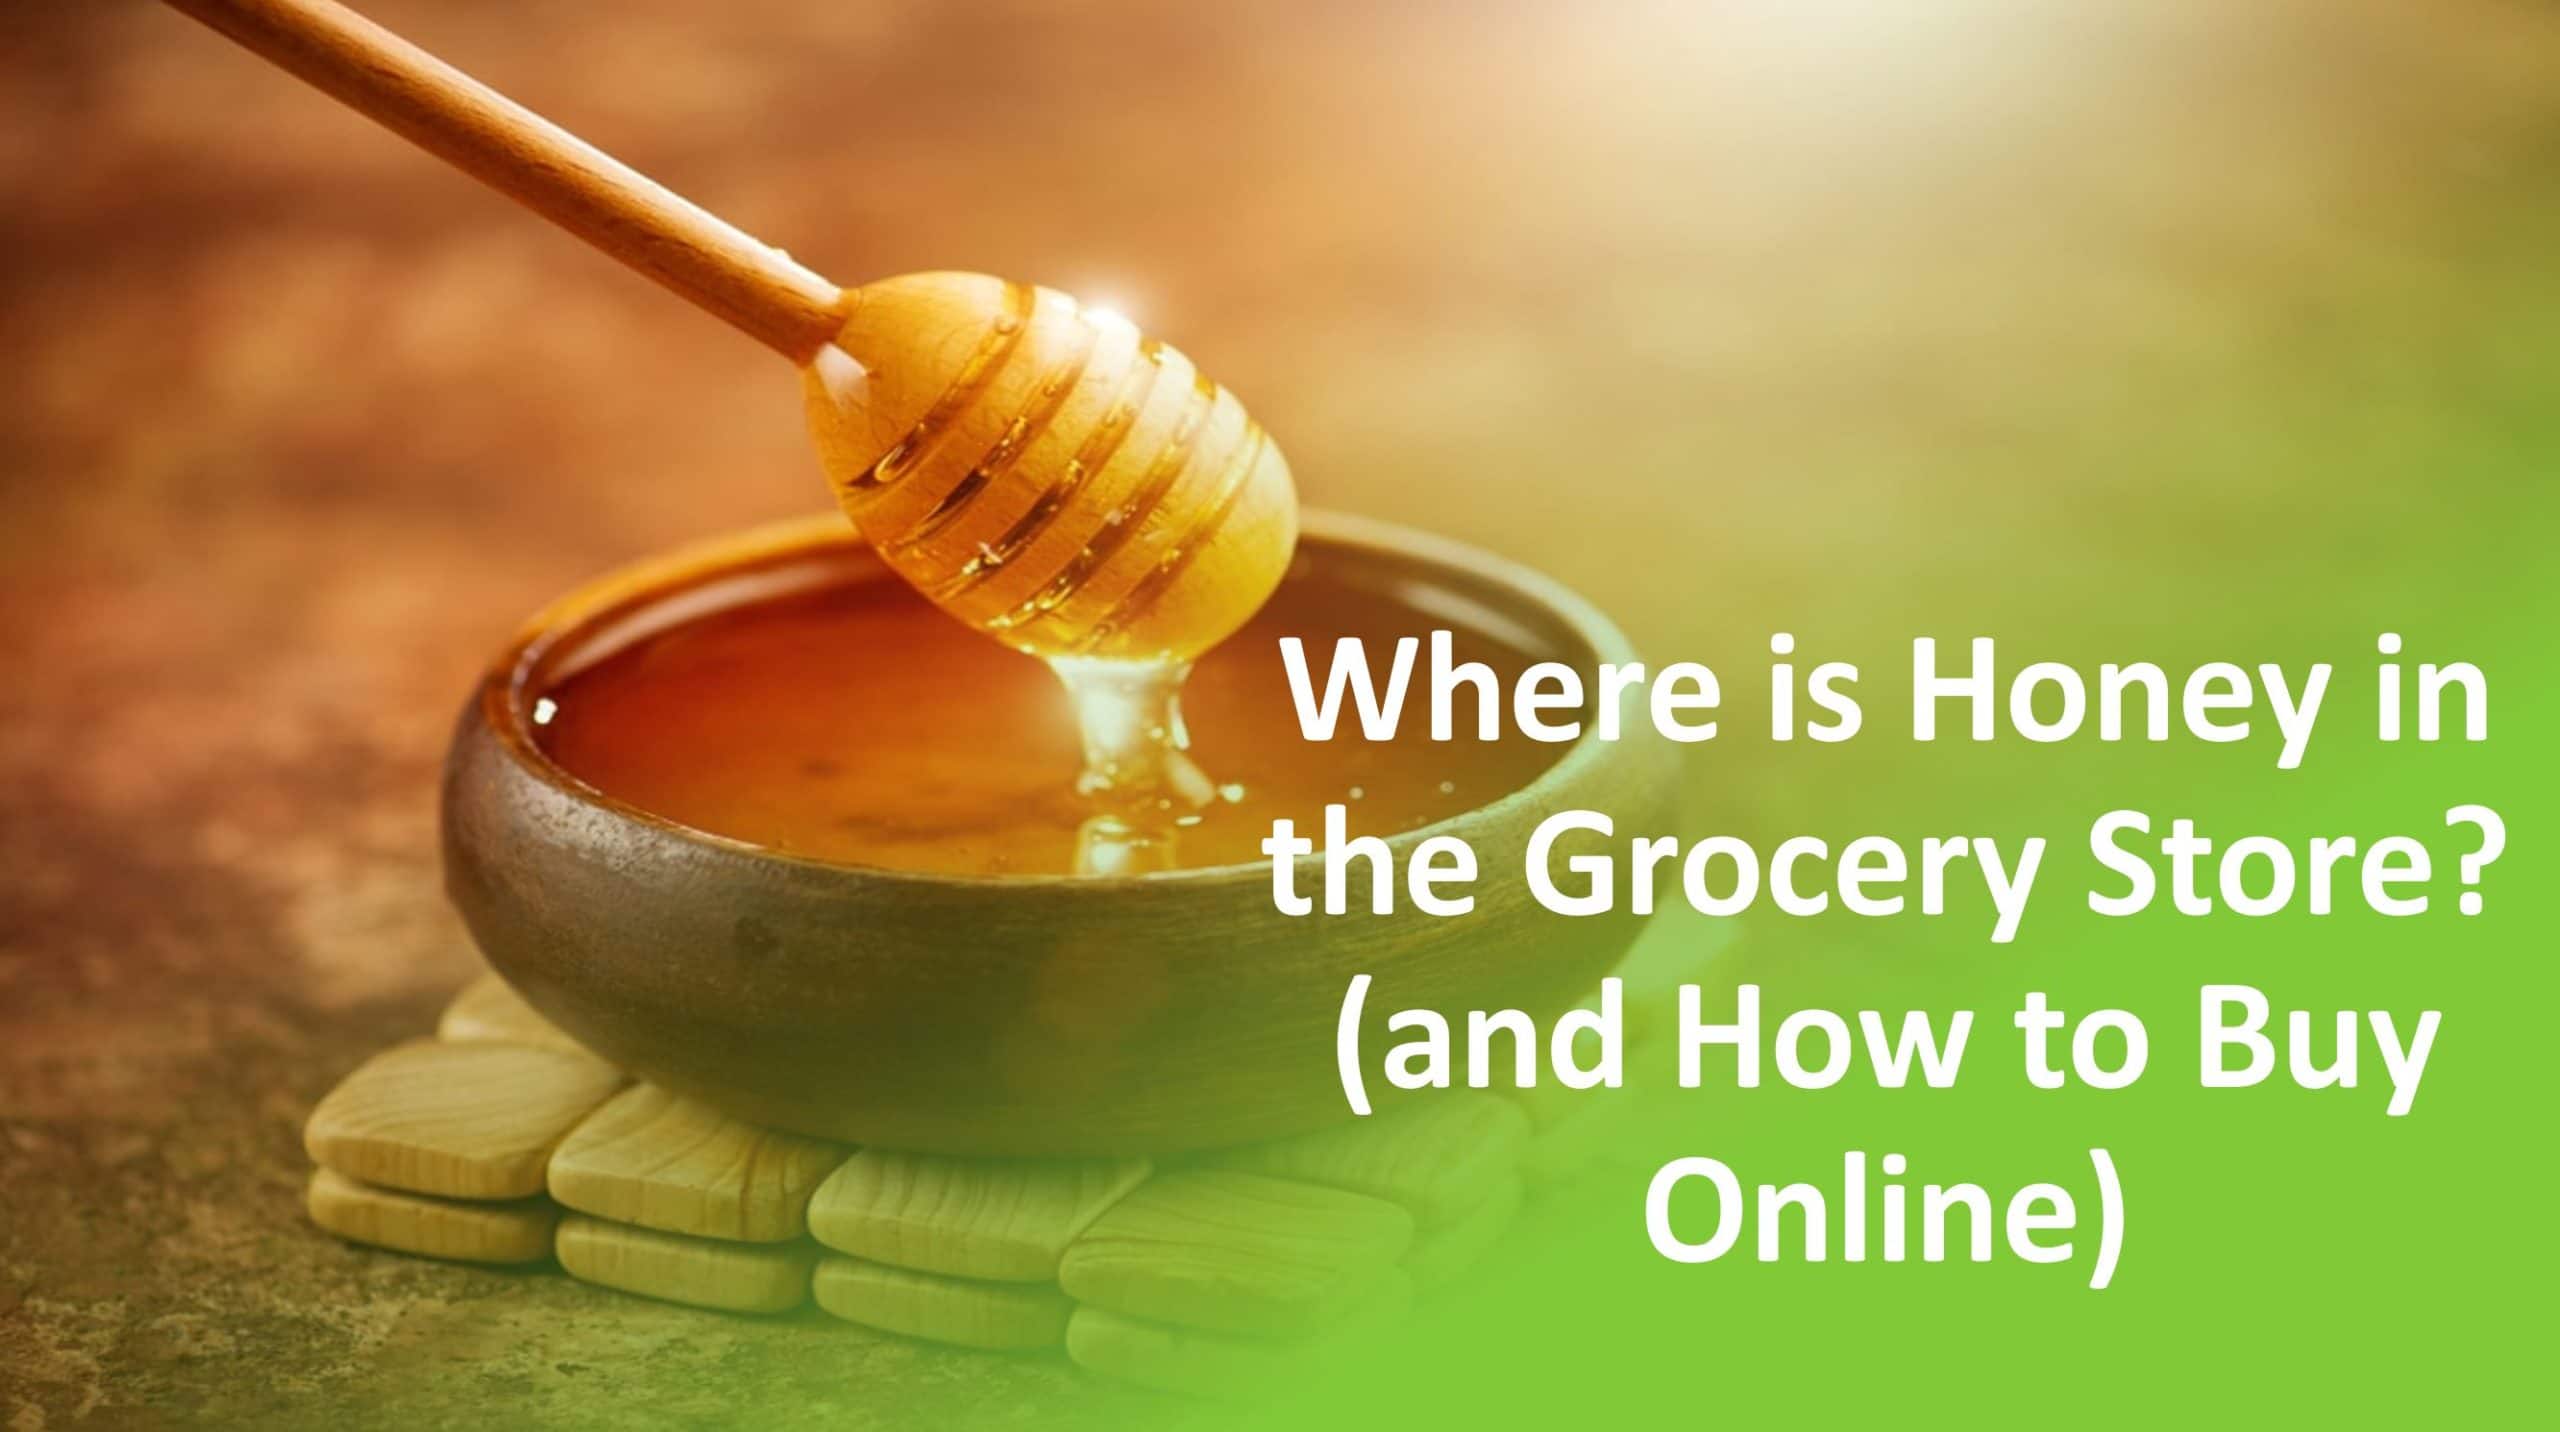 Where is Honey in the Grocery Store? (and How to Buy Online)